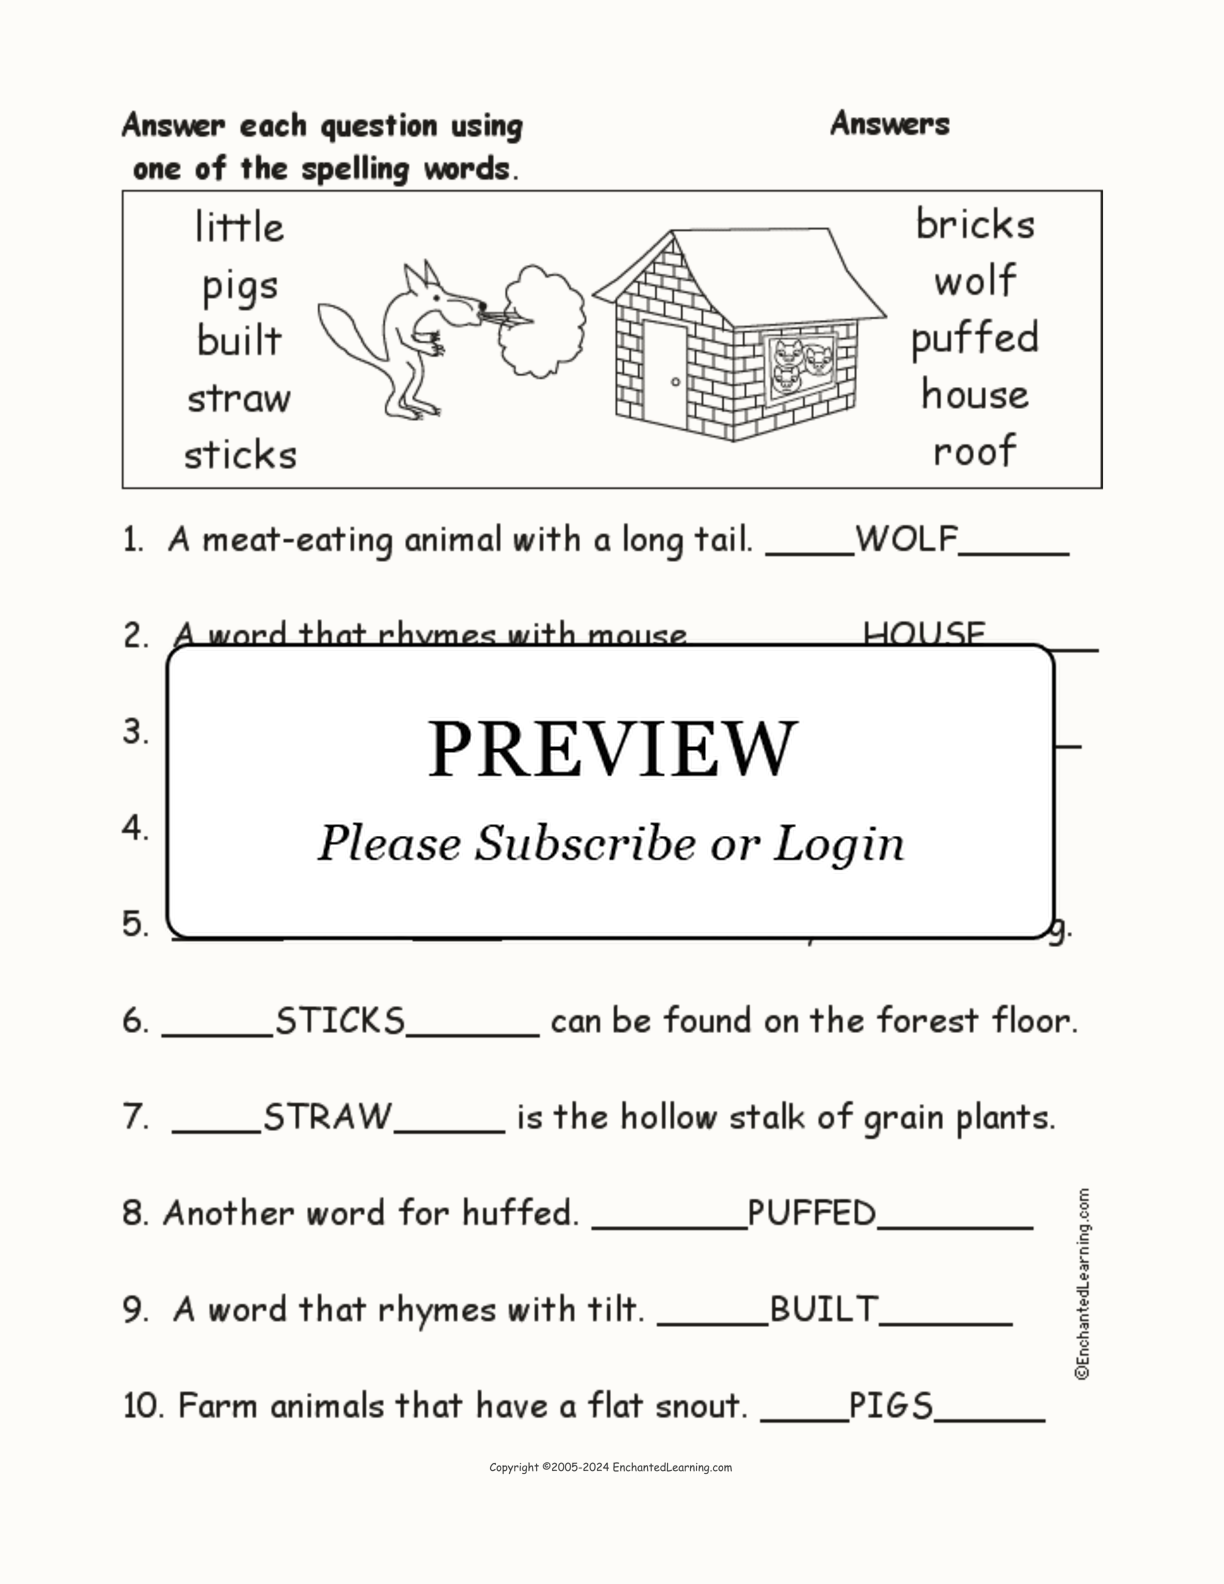 'Three Little Pigs' Spelling Word Questions interactive worksheet page 2